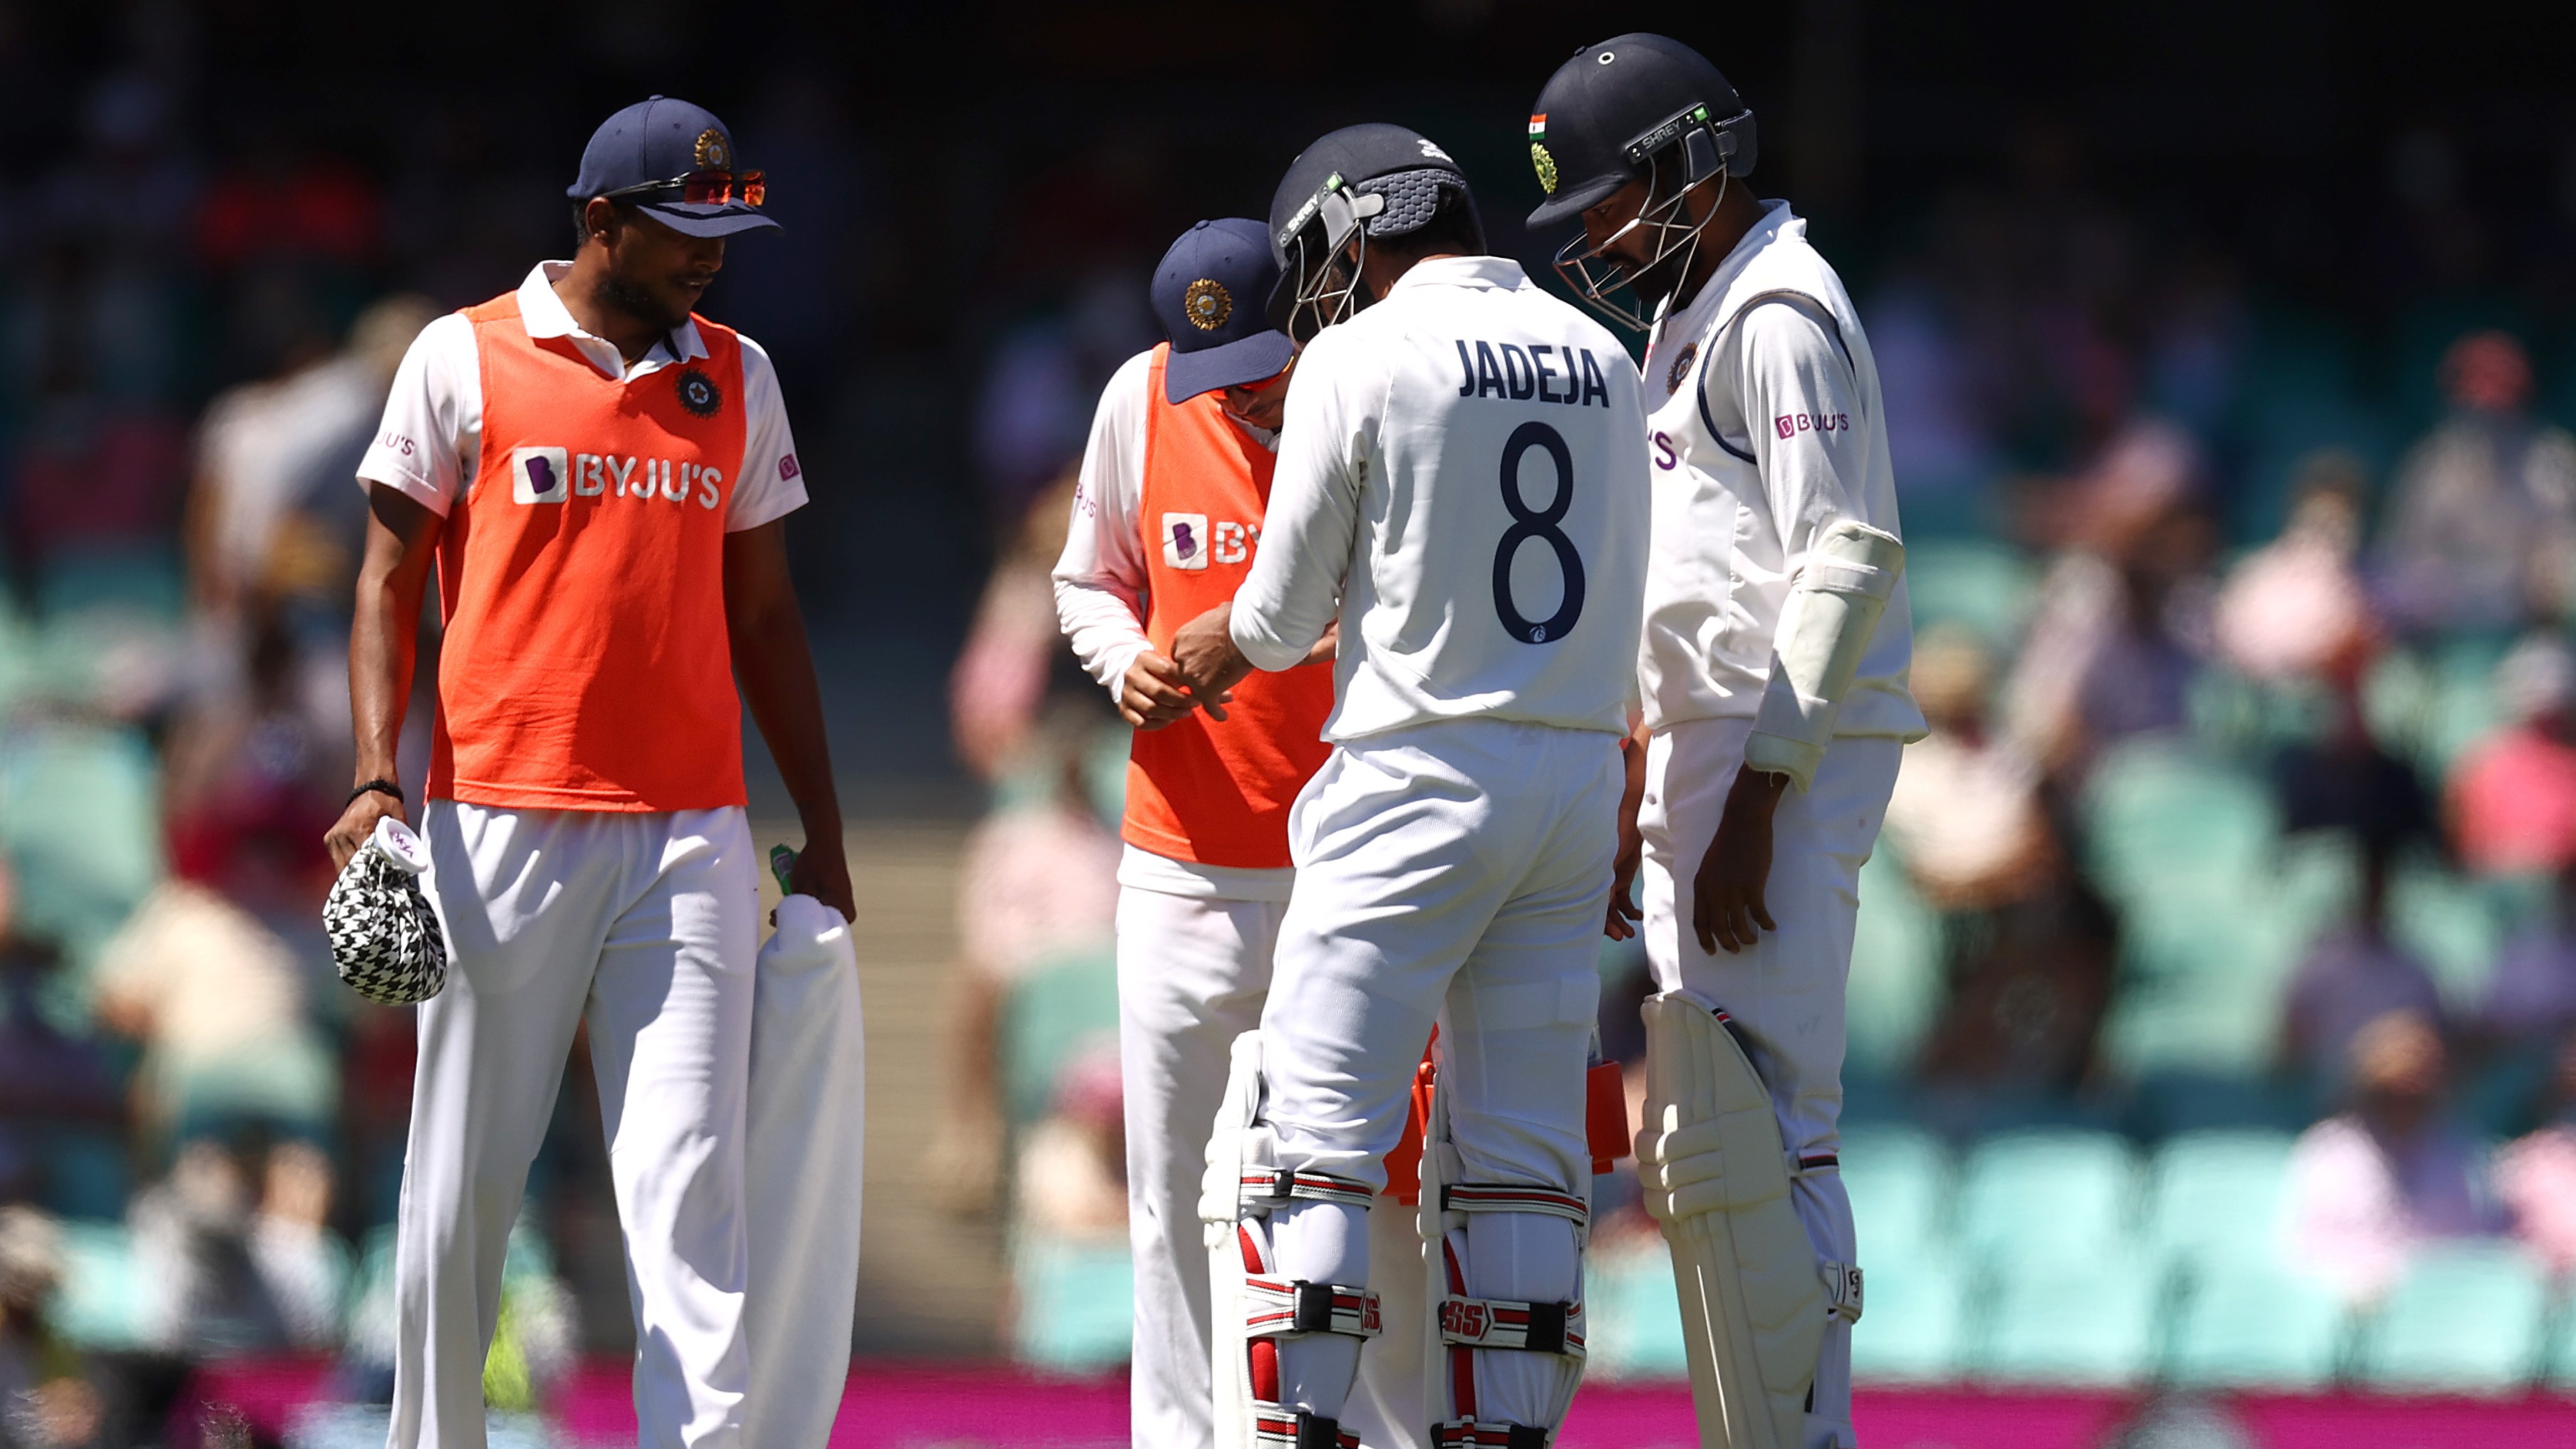 Double injury scares for India; Pant, Jadeja taken to hospital for scans